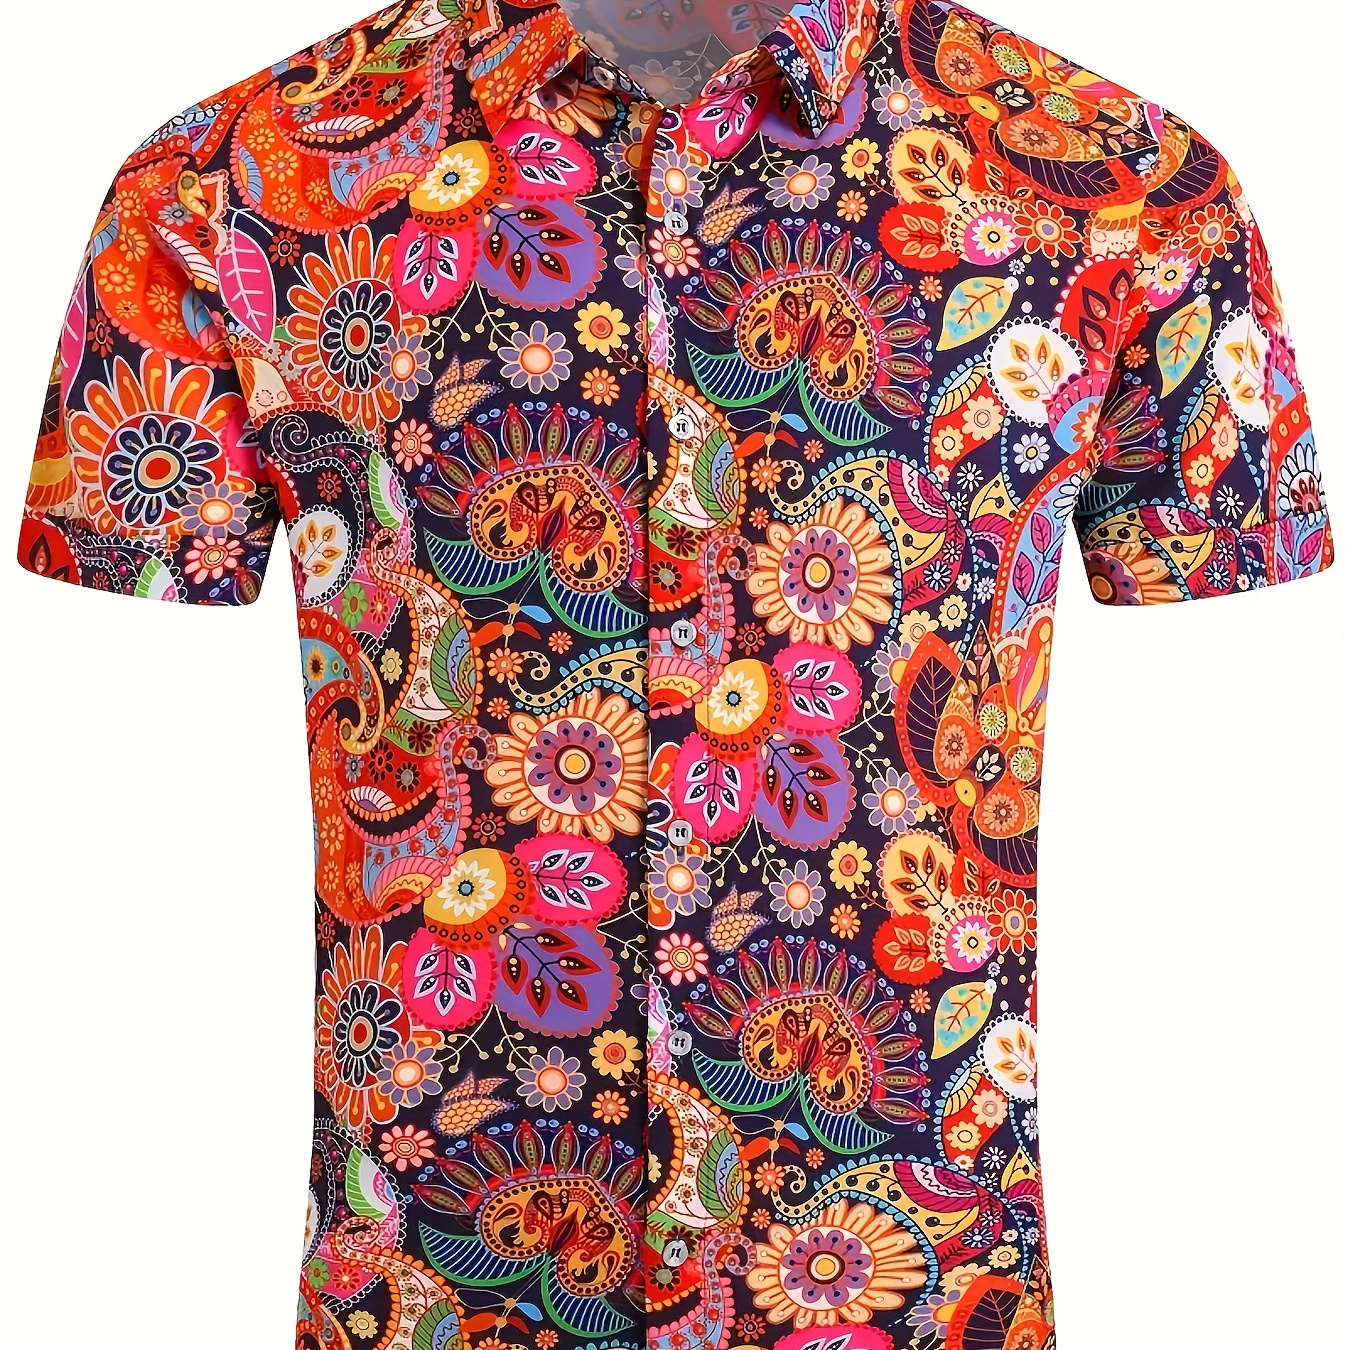 

Men's Ethnic Style Graphic Pattern Print Lapel Shirt With Short Sleeve And Button Down Placket, Stylish And Comfy Tops For Summer Leisurewear And Beach Vacation